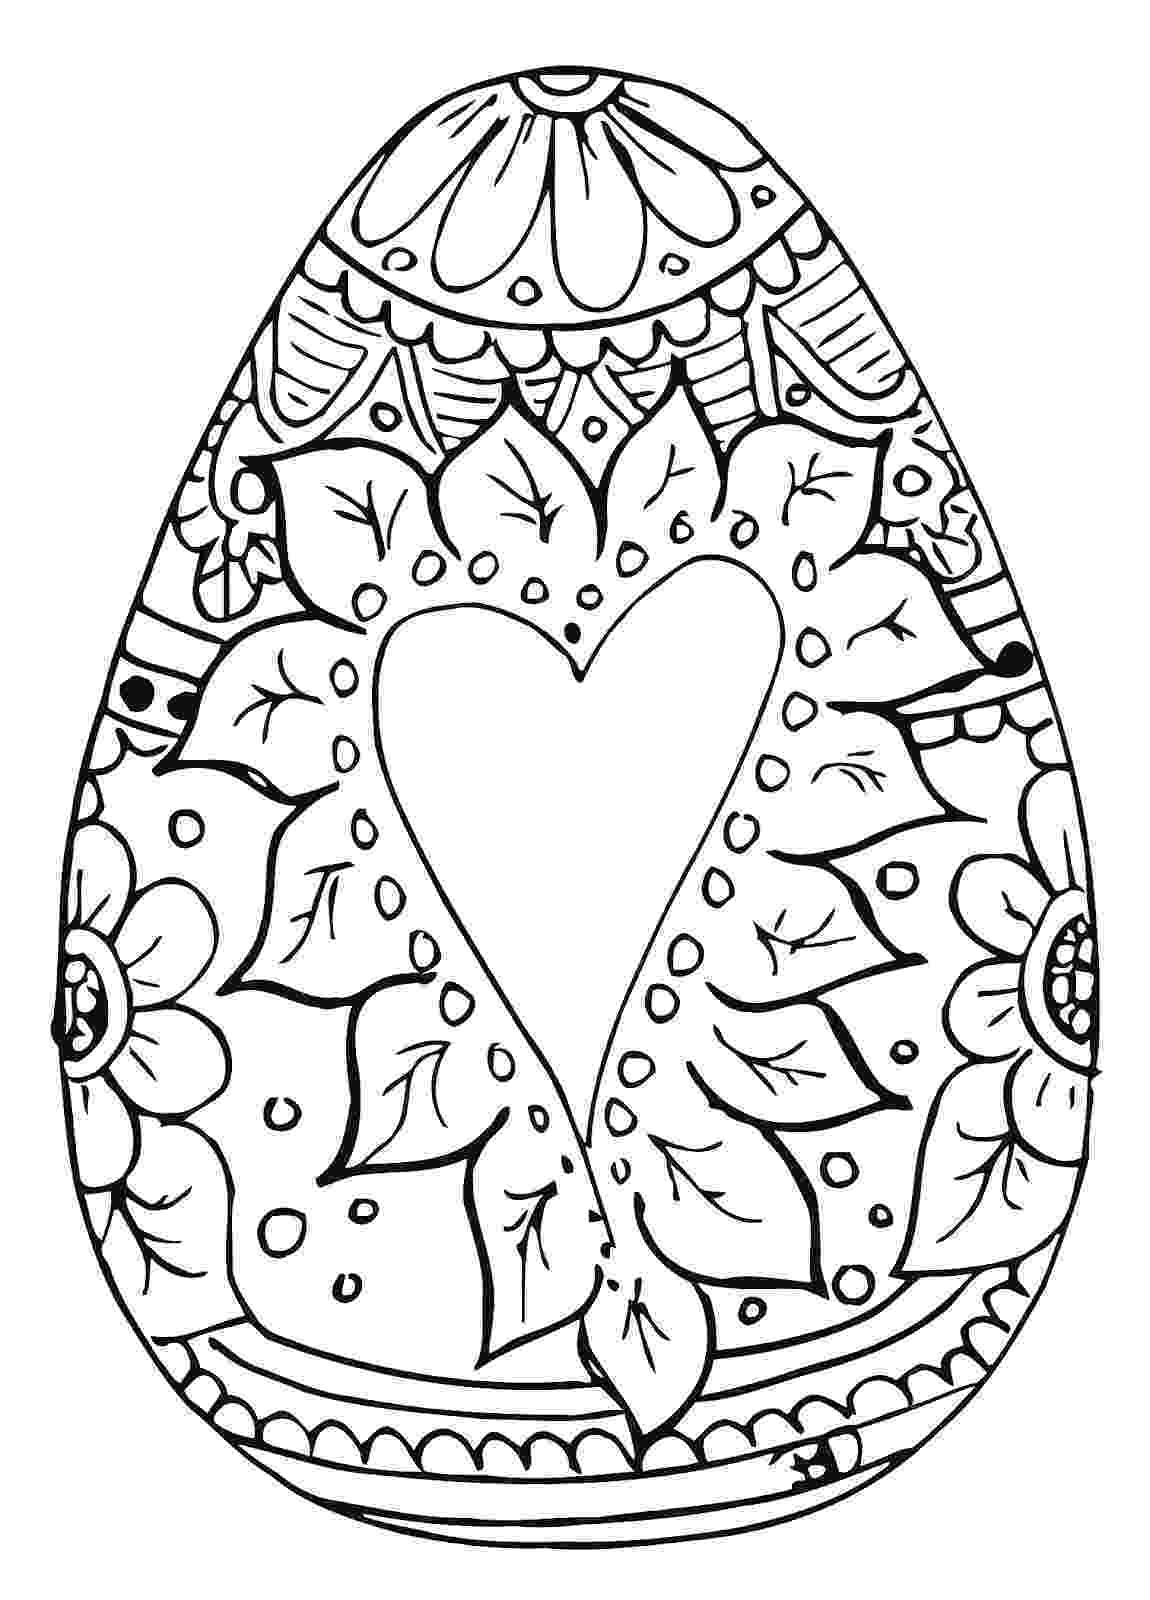 printable colouring pages of easter eggs easter coloring pages for adults best coloring pages for easter of eggs printable colouring pages 